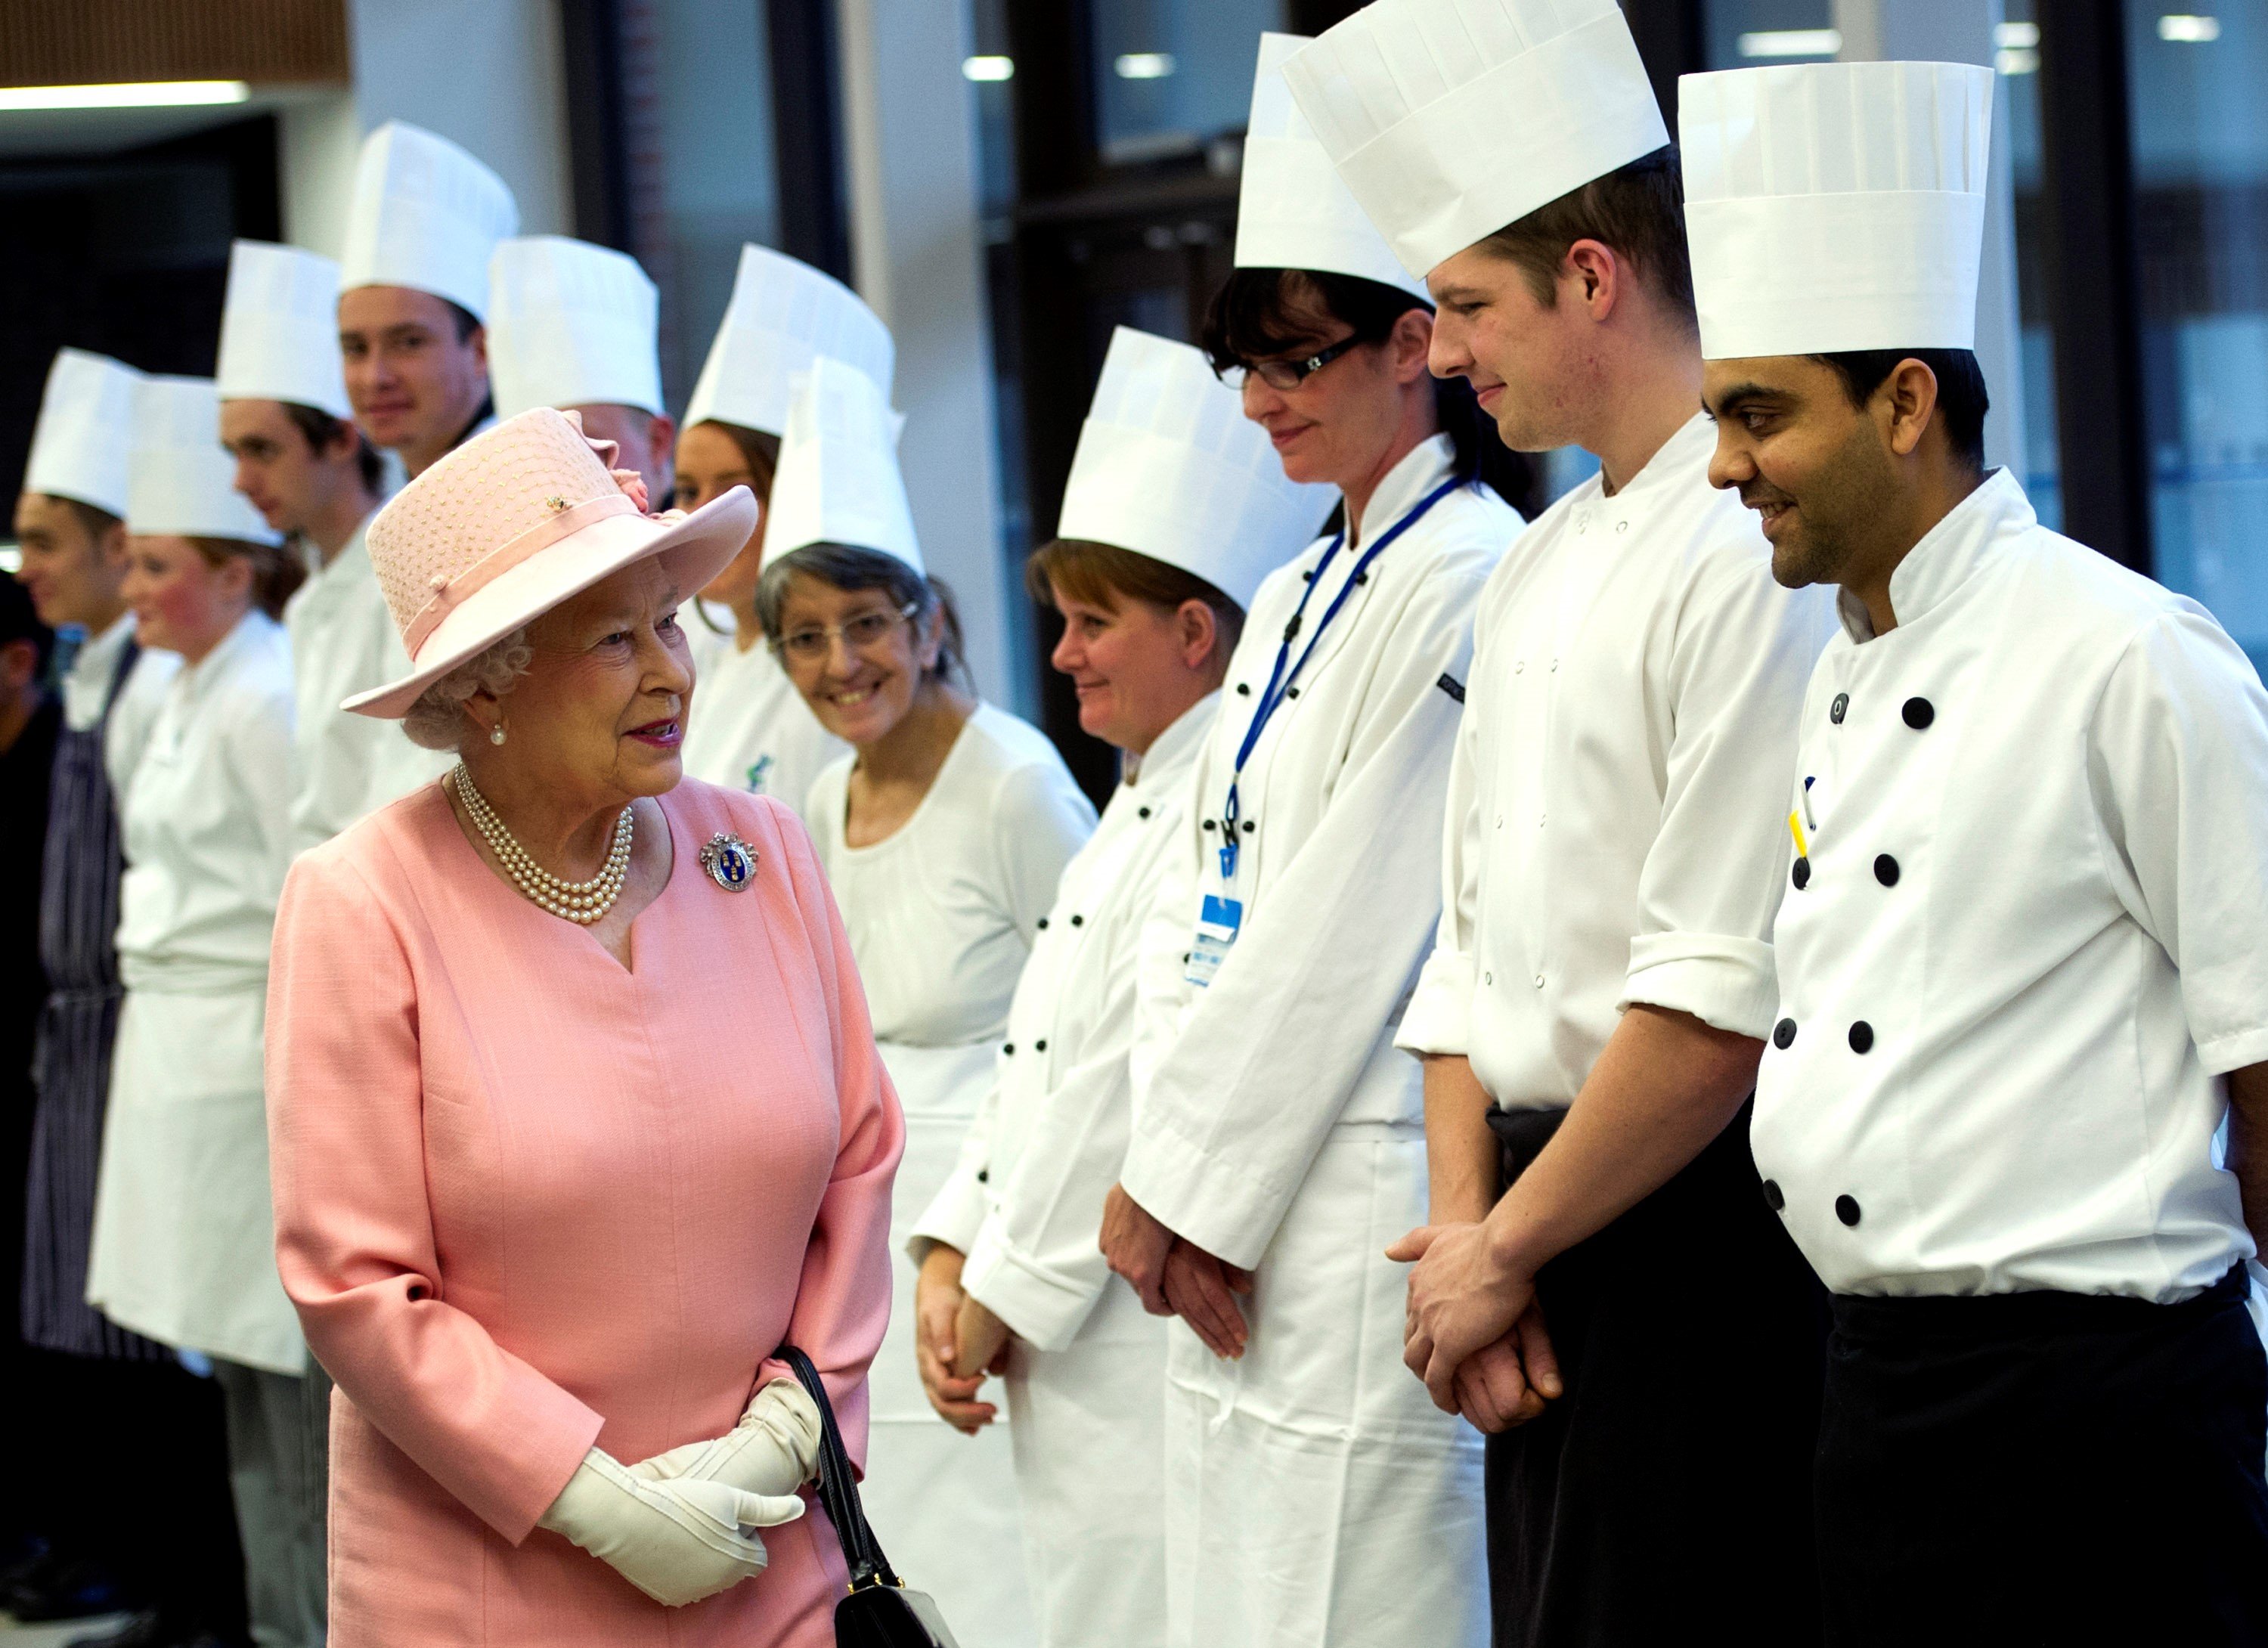 Queen Elizabeth II, Freeman of The Drapers' Company thanks the chefs for her school dinner as she officially opened The Drapers' Academy